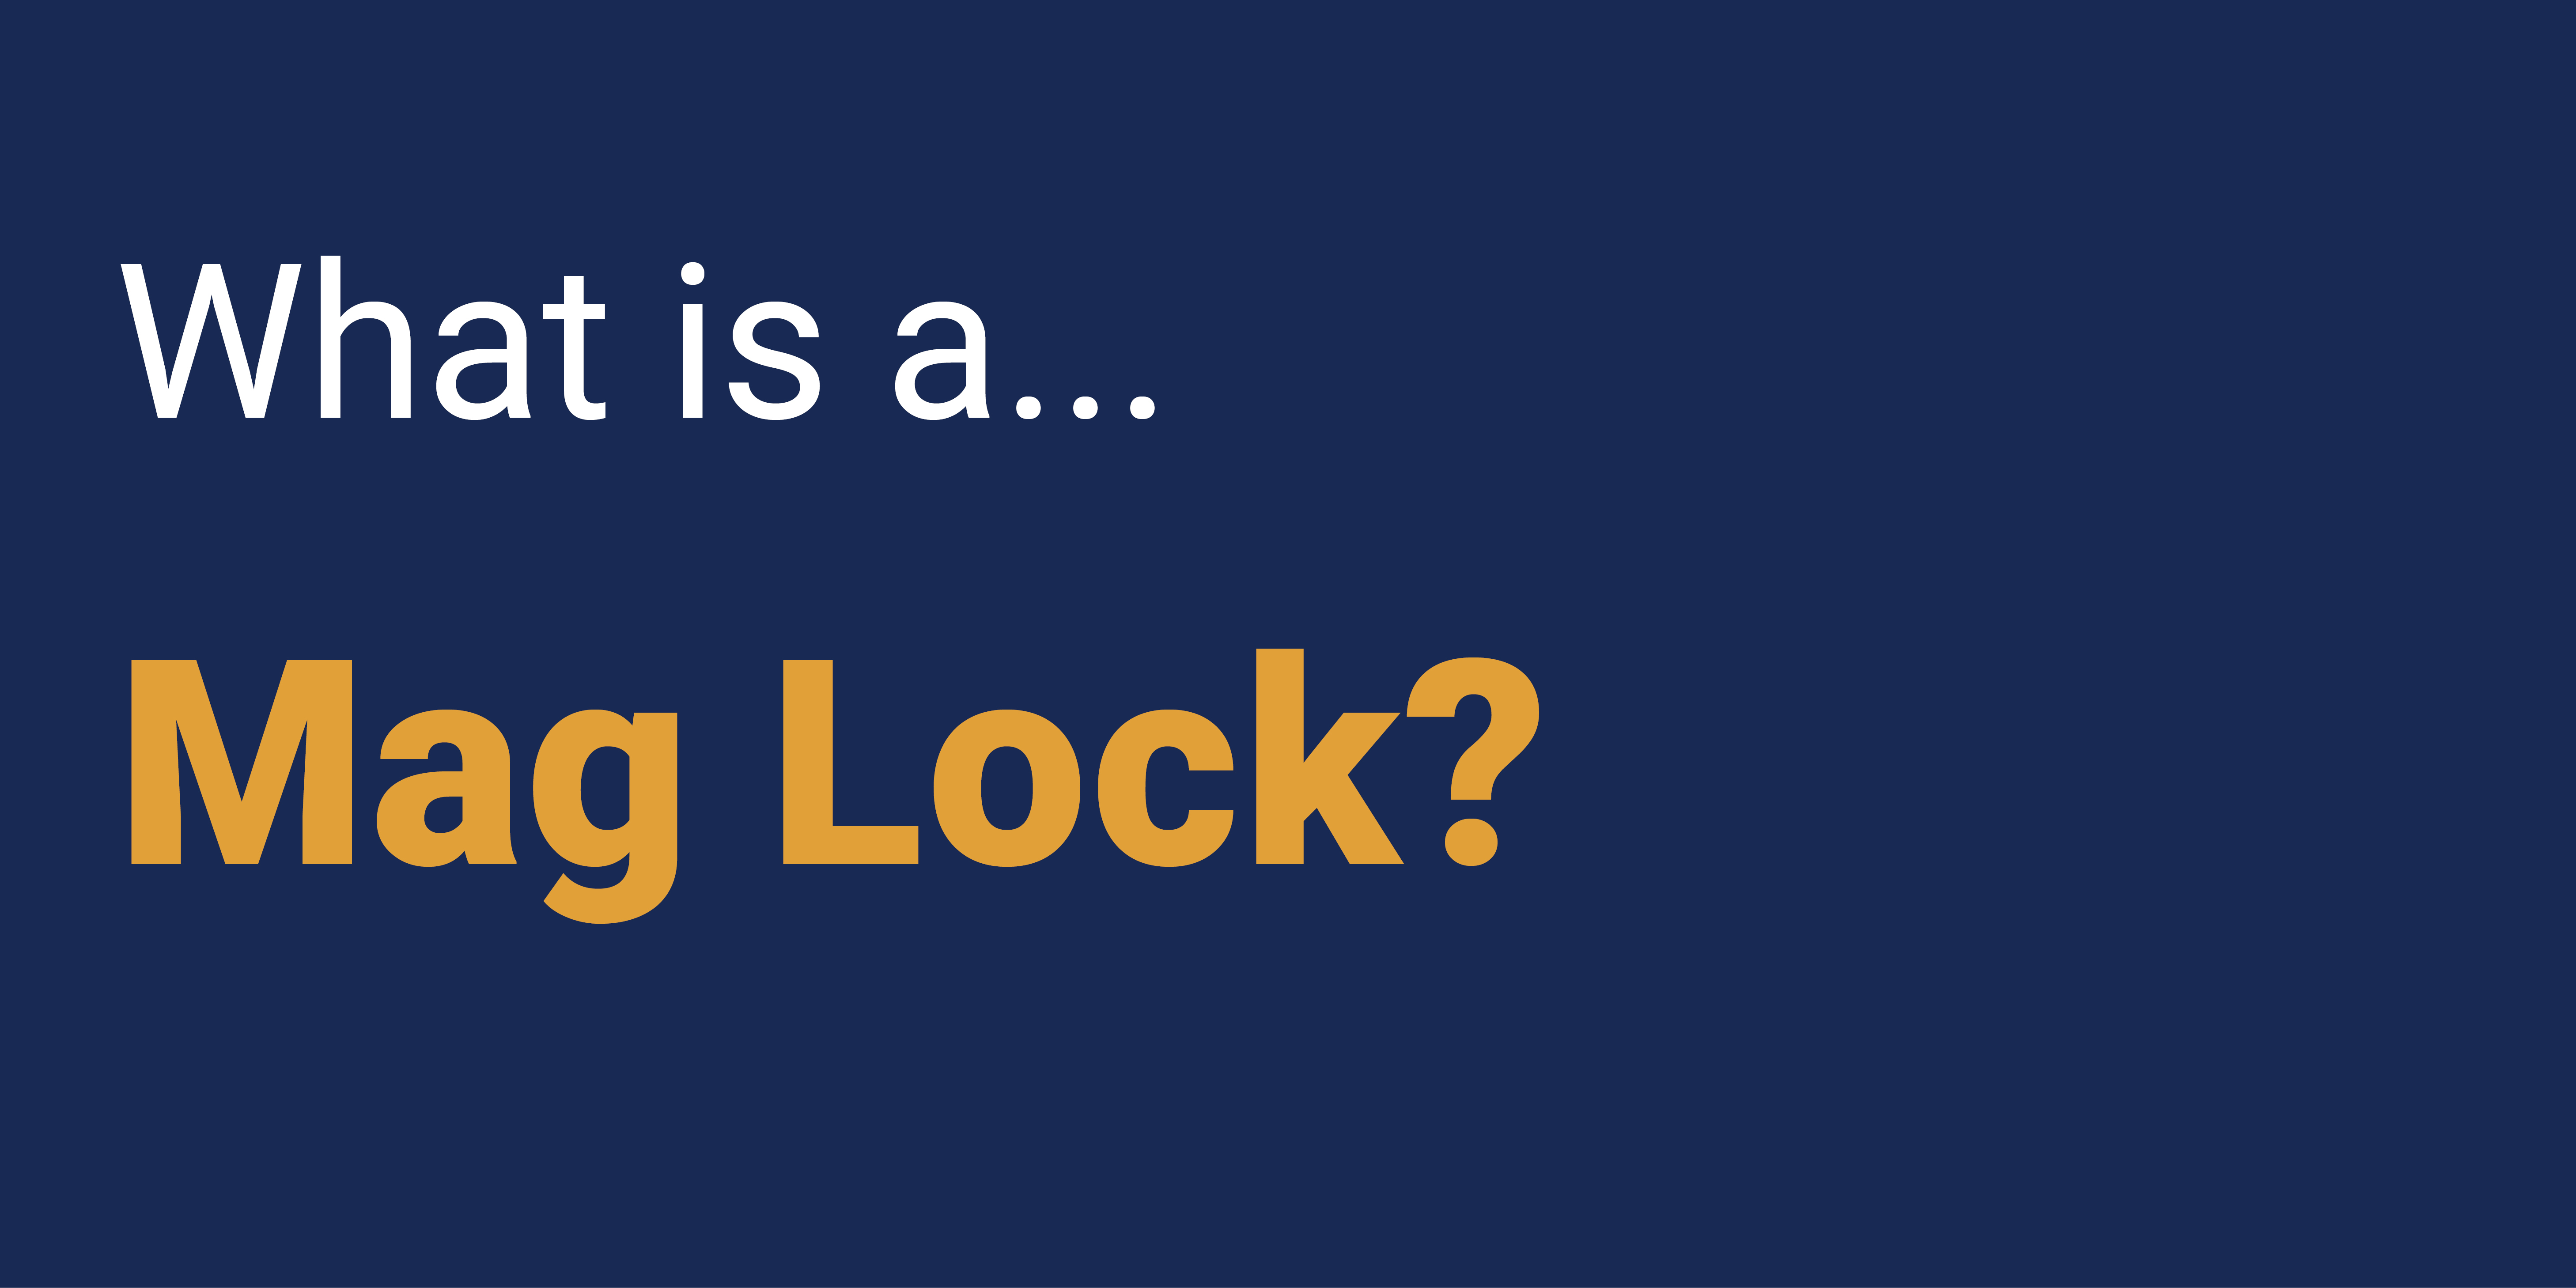 What is a Mag Lock?